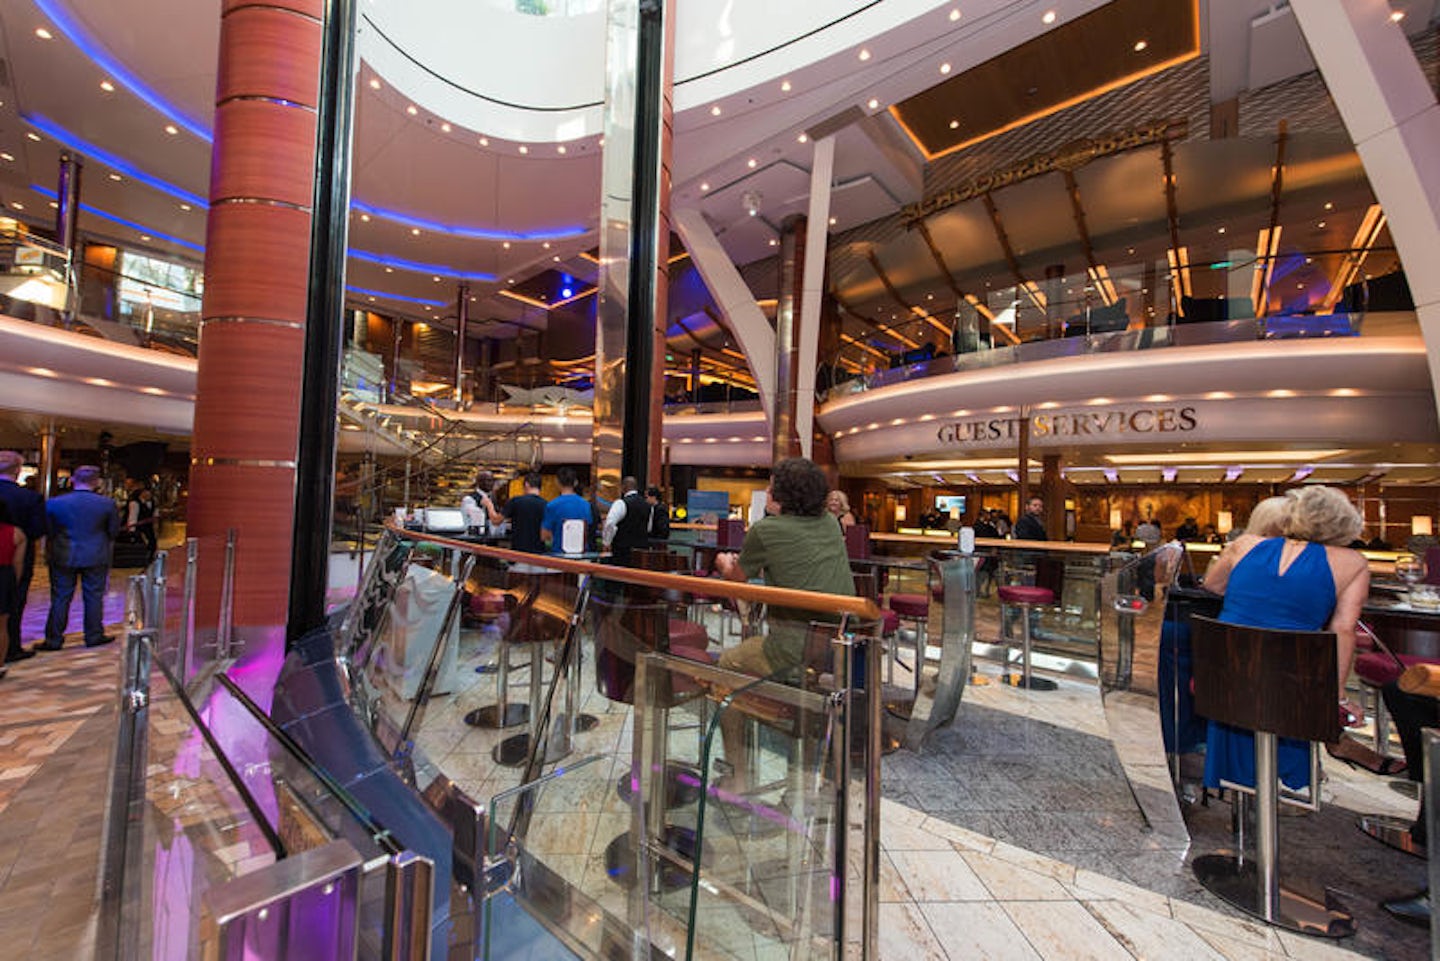 Rising Tide Bar on Oasis of the Seas